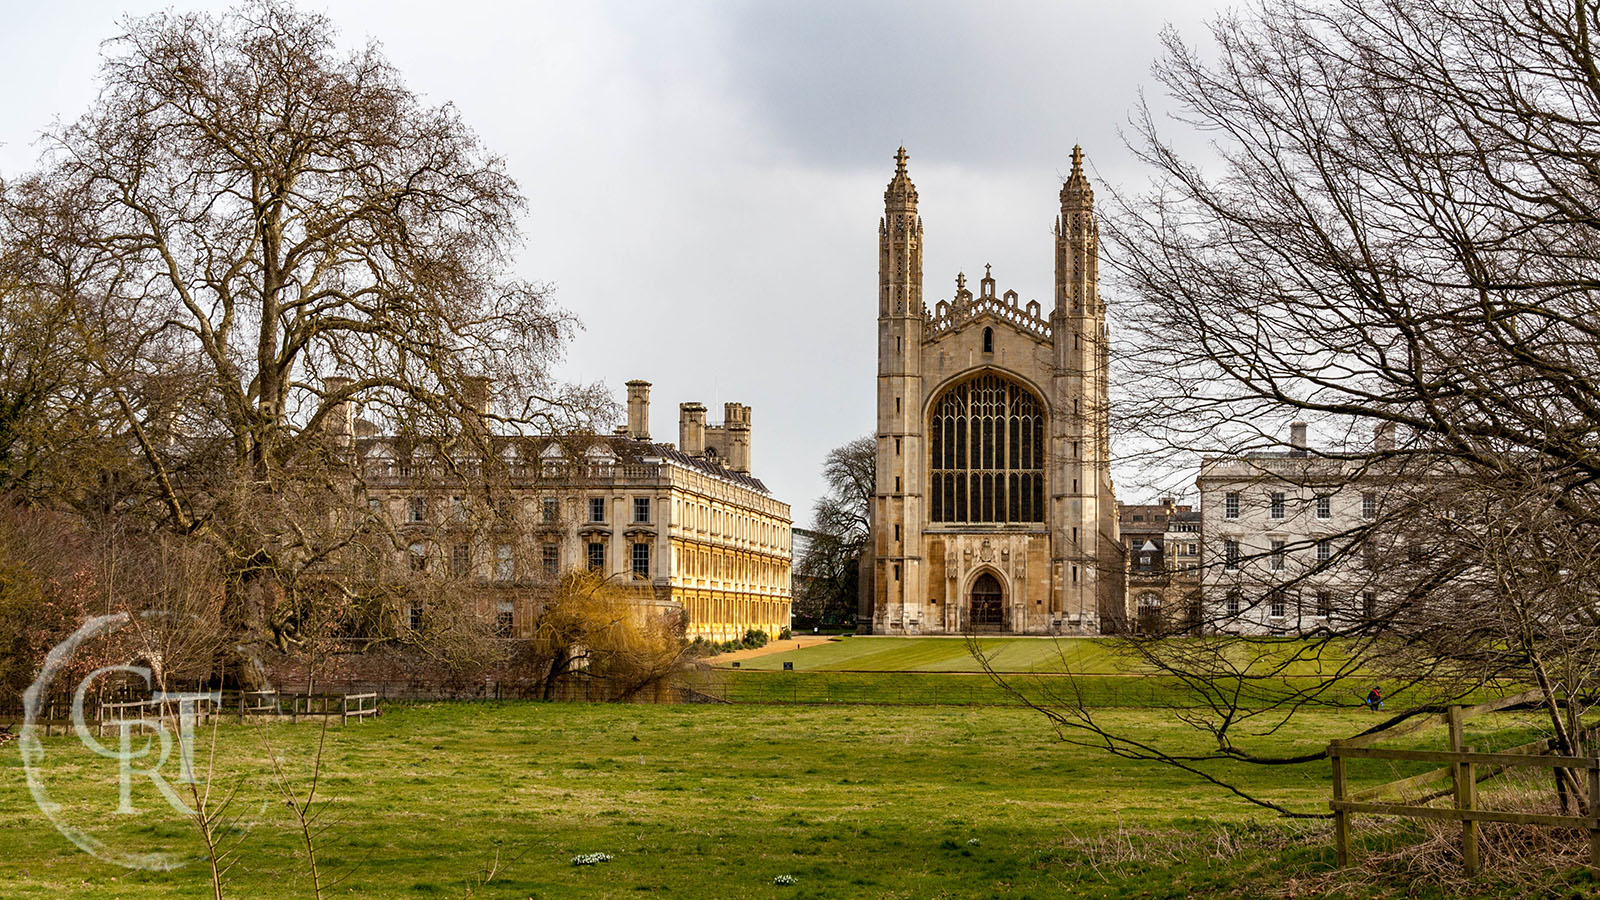 King's and Clare college from the Backs in late winter